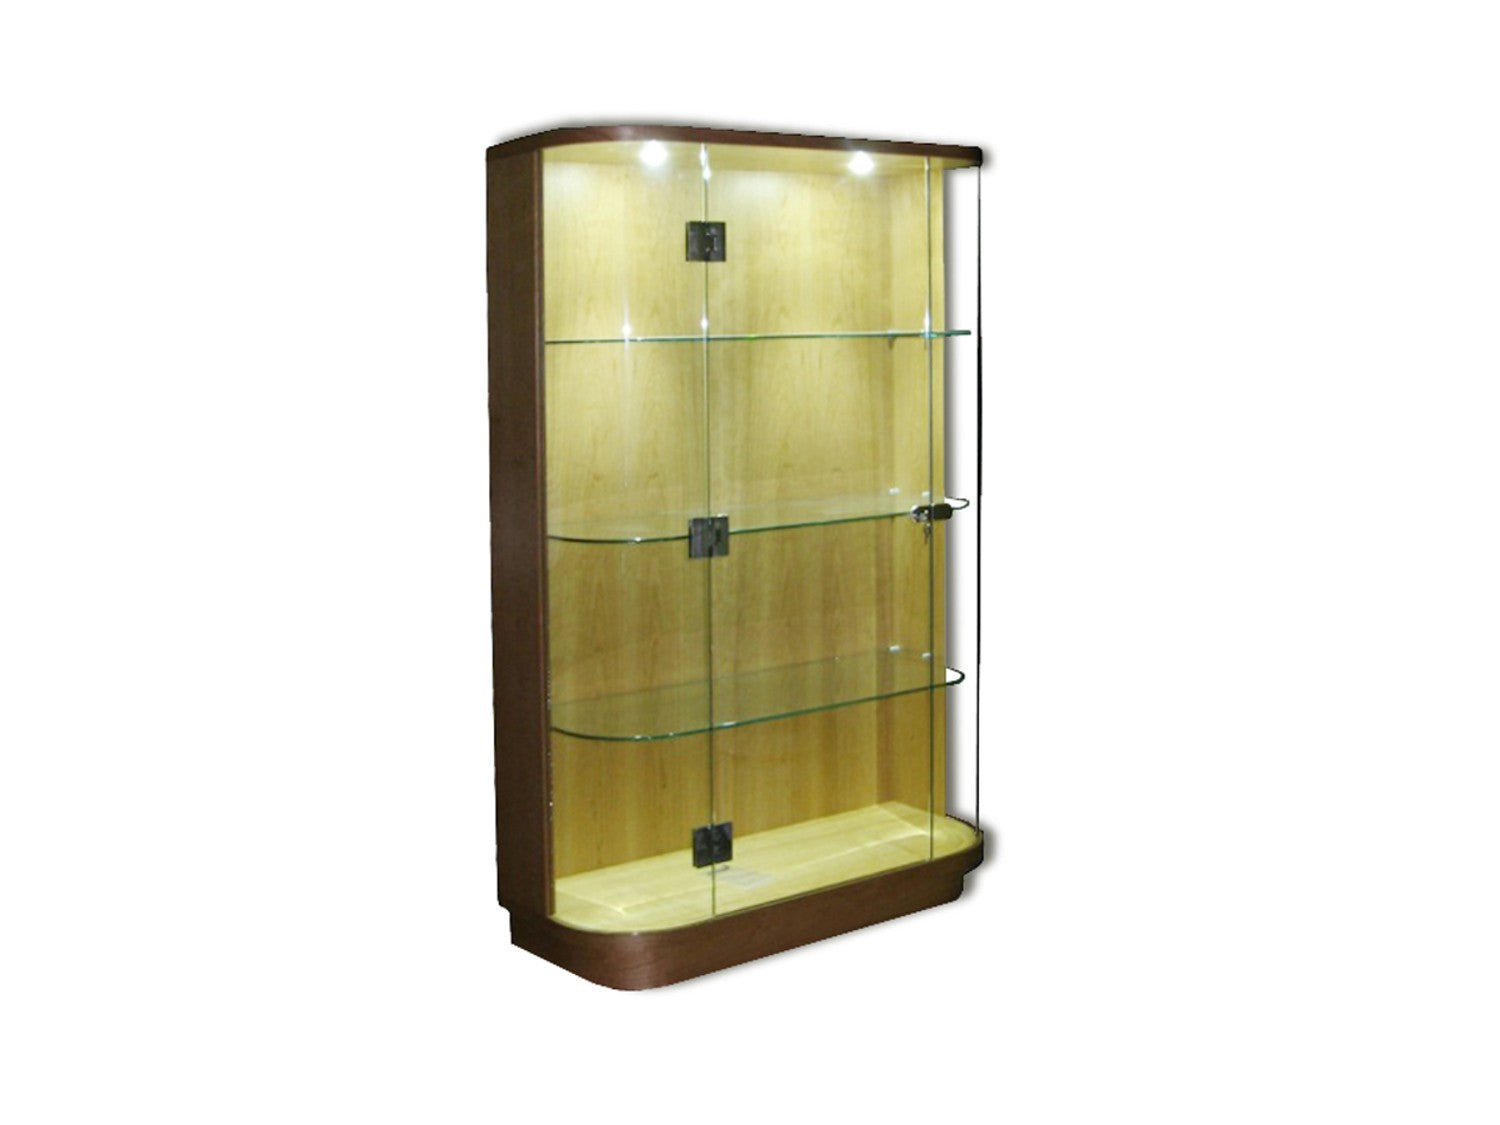 Bespoke display cabinet with curved glass